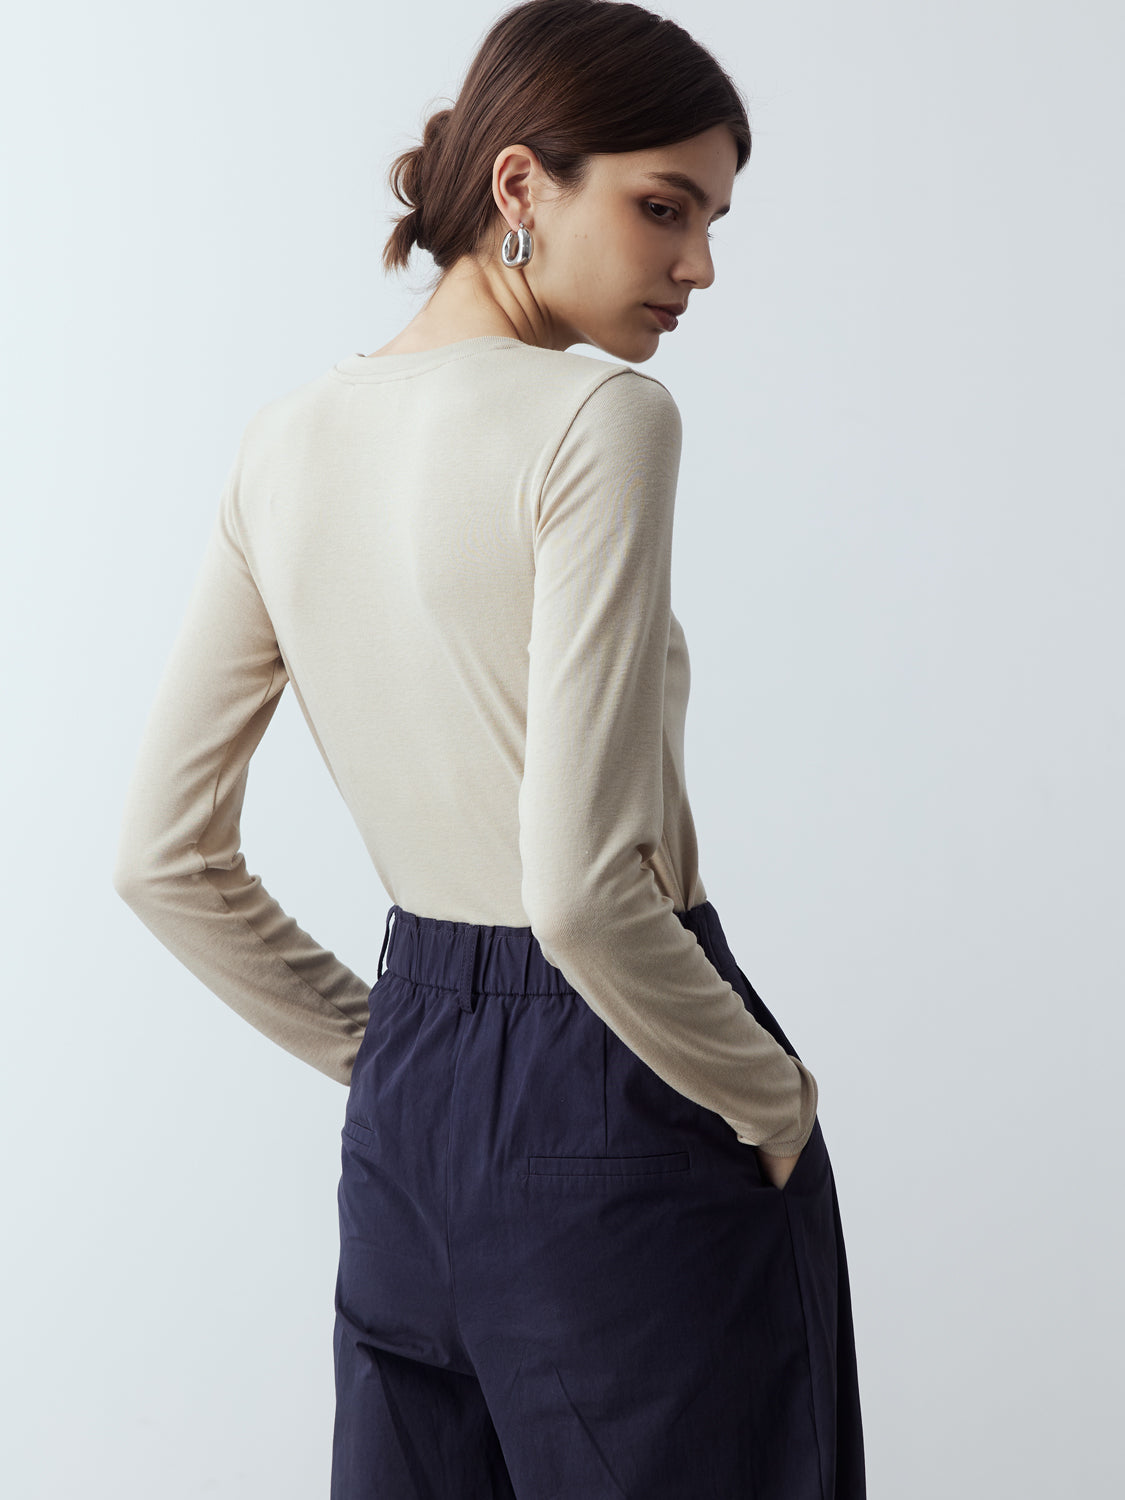 sand : Model is wearing the Fitted Long Sleeve T-Shirt in Sand, which comes with a rounded crew neckline and a centre front stitch line. Arm-hugging but gives a relaxed bodice. Worn with Cotton Tailored Trousers in Navy.